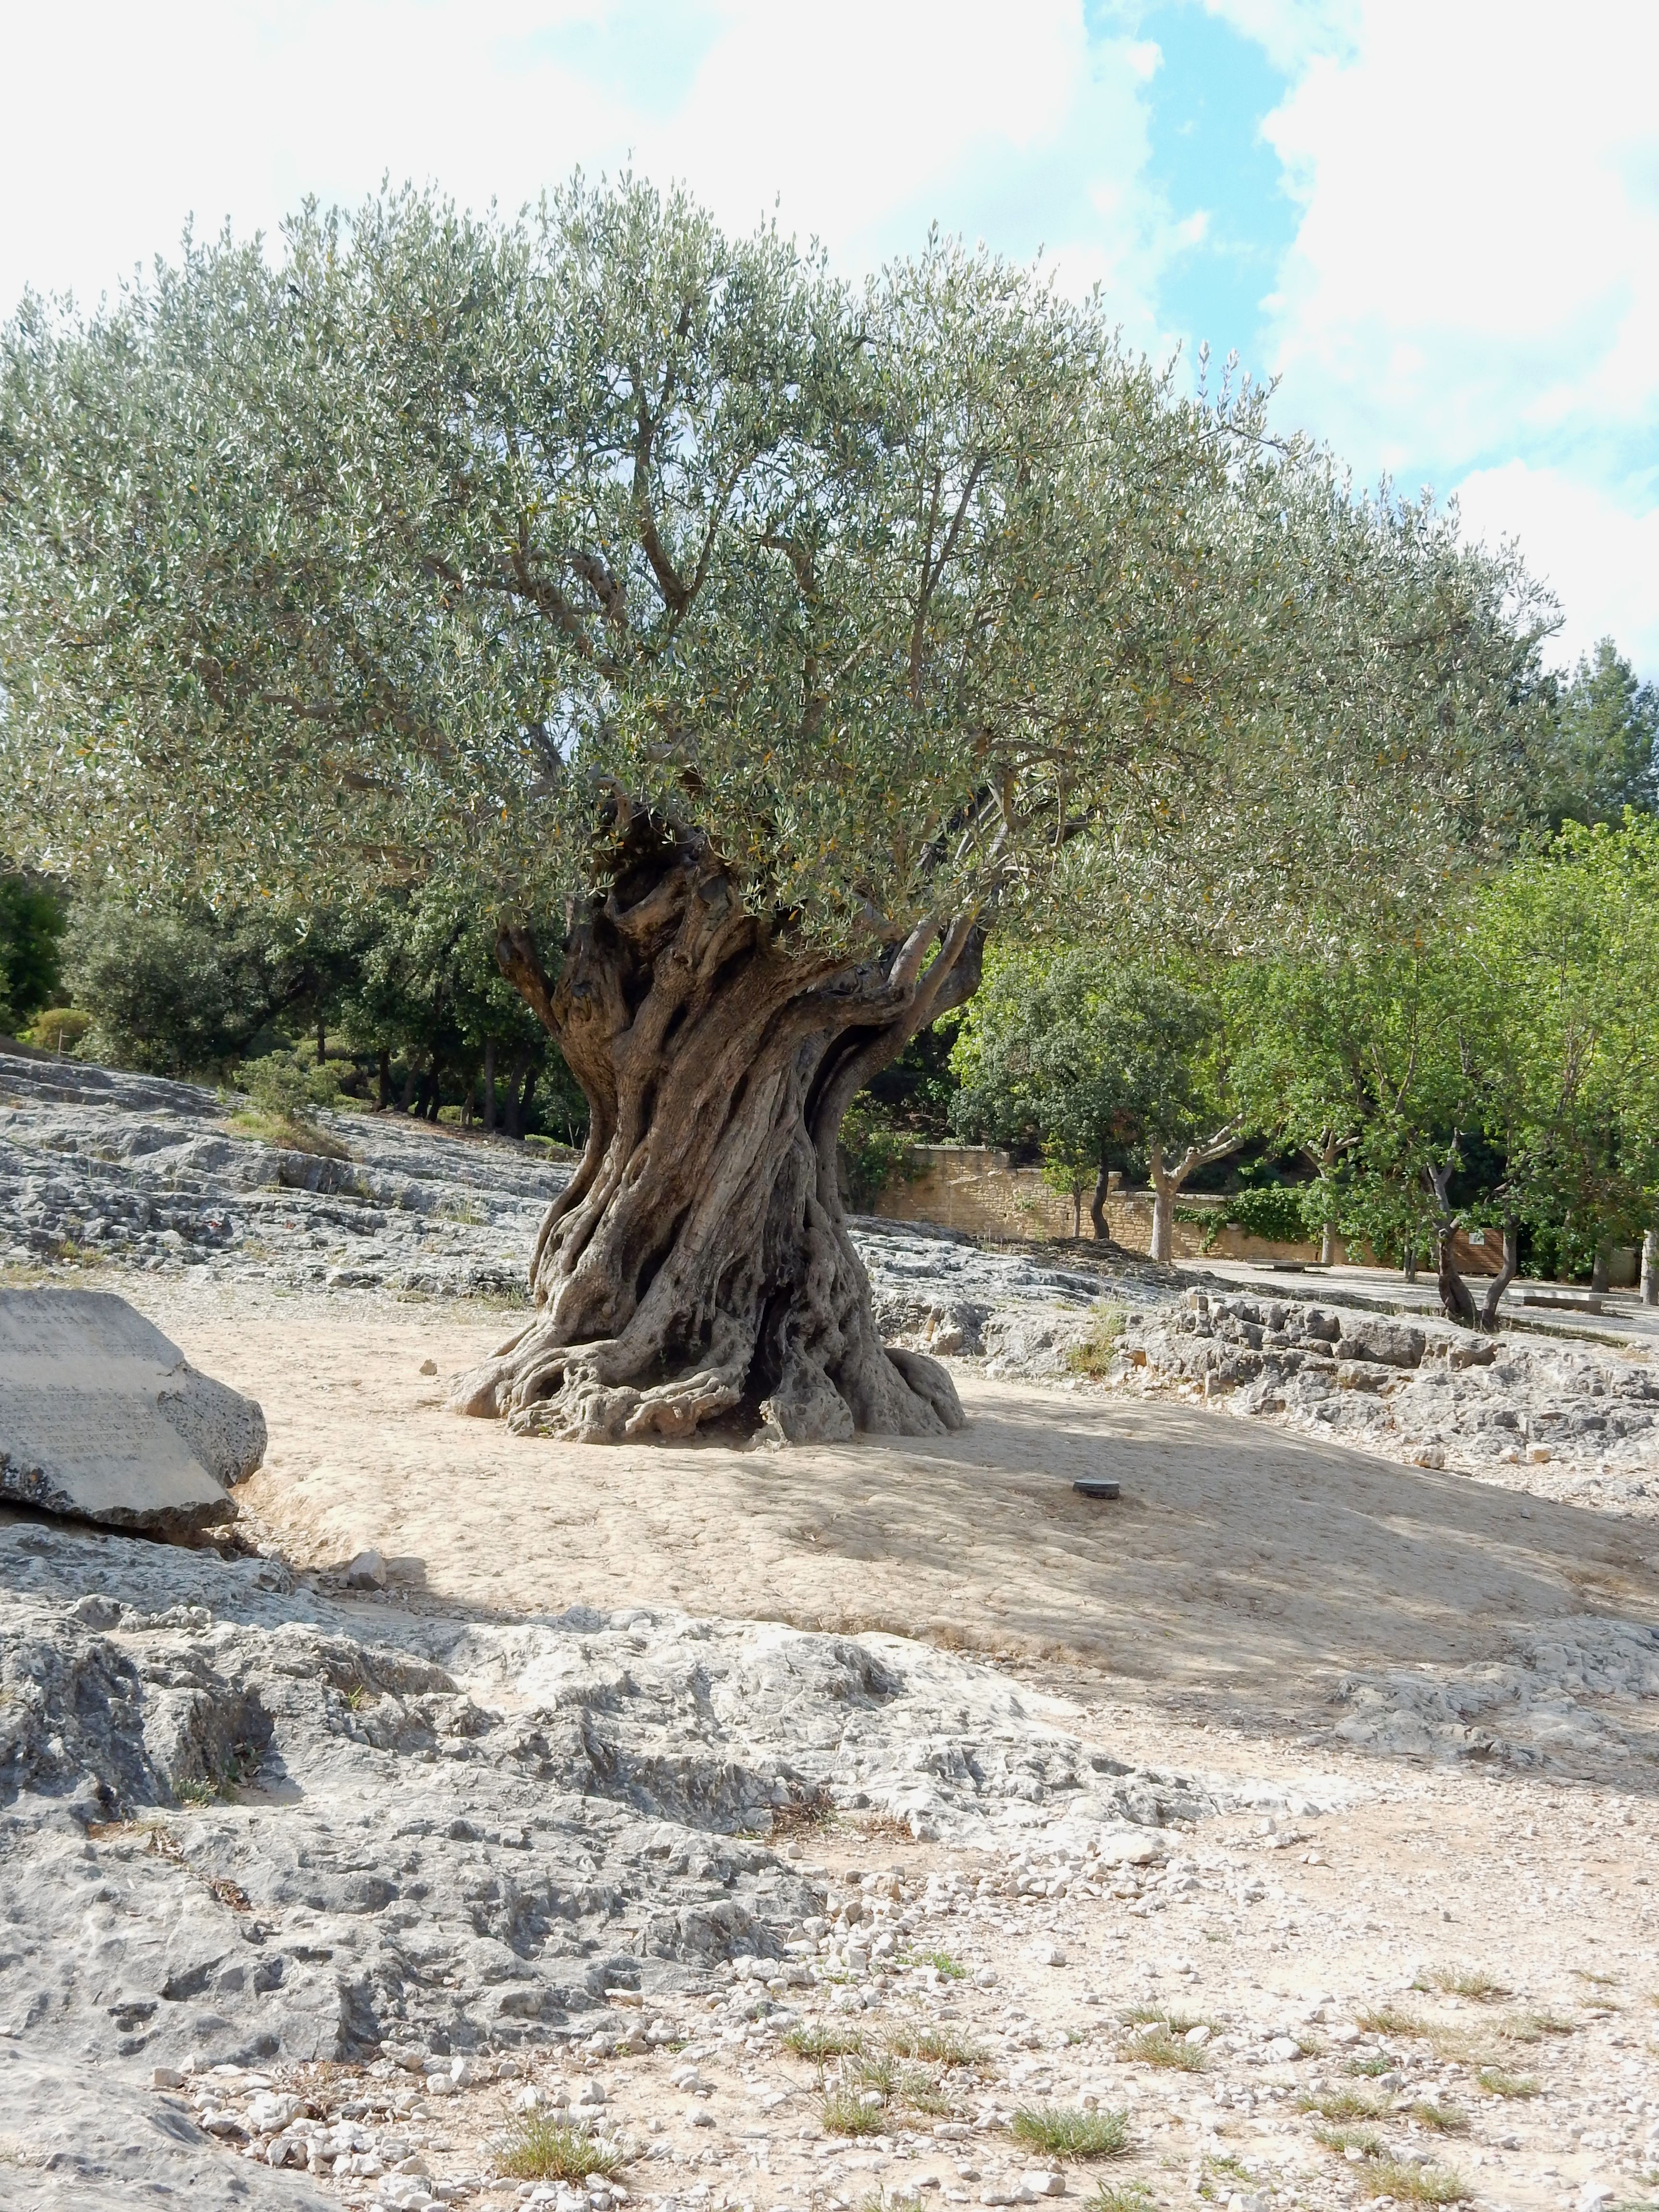 Oive at Pont du Gard, planted in the year 908.